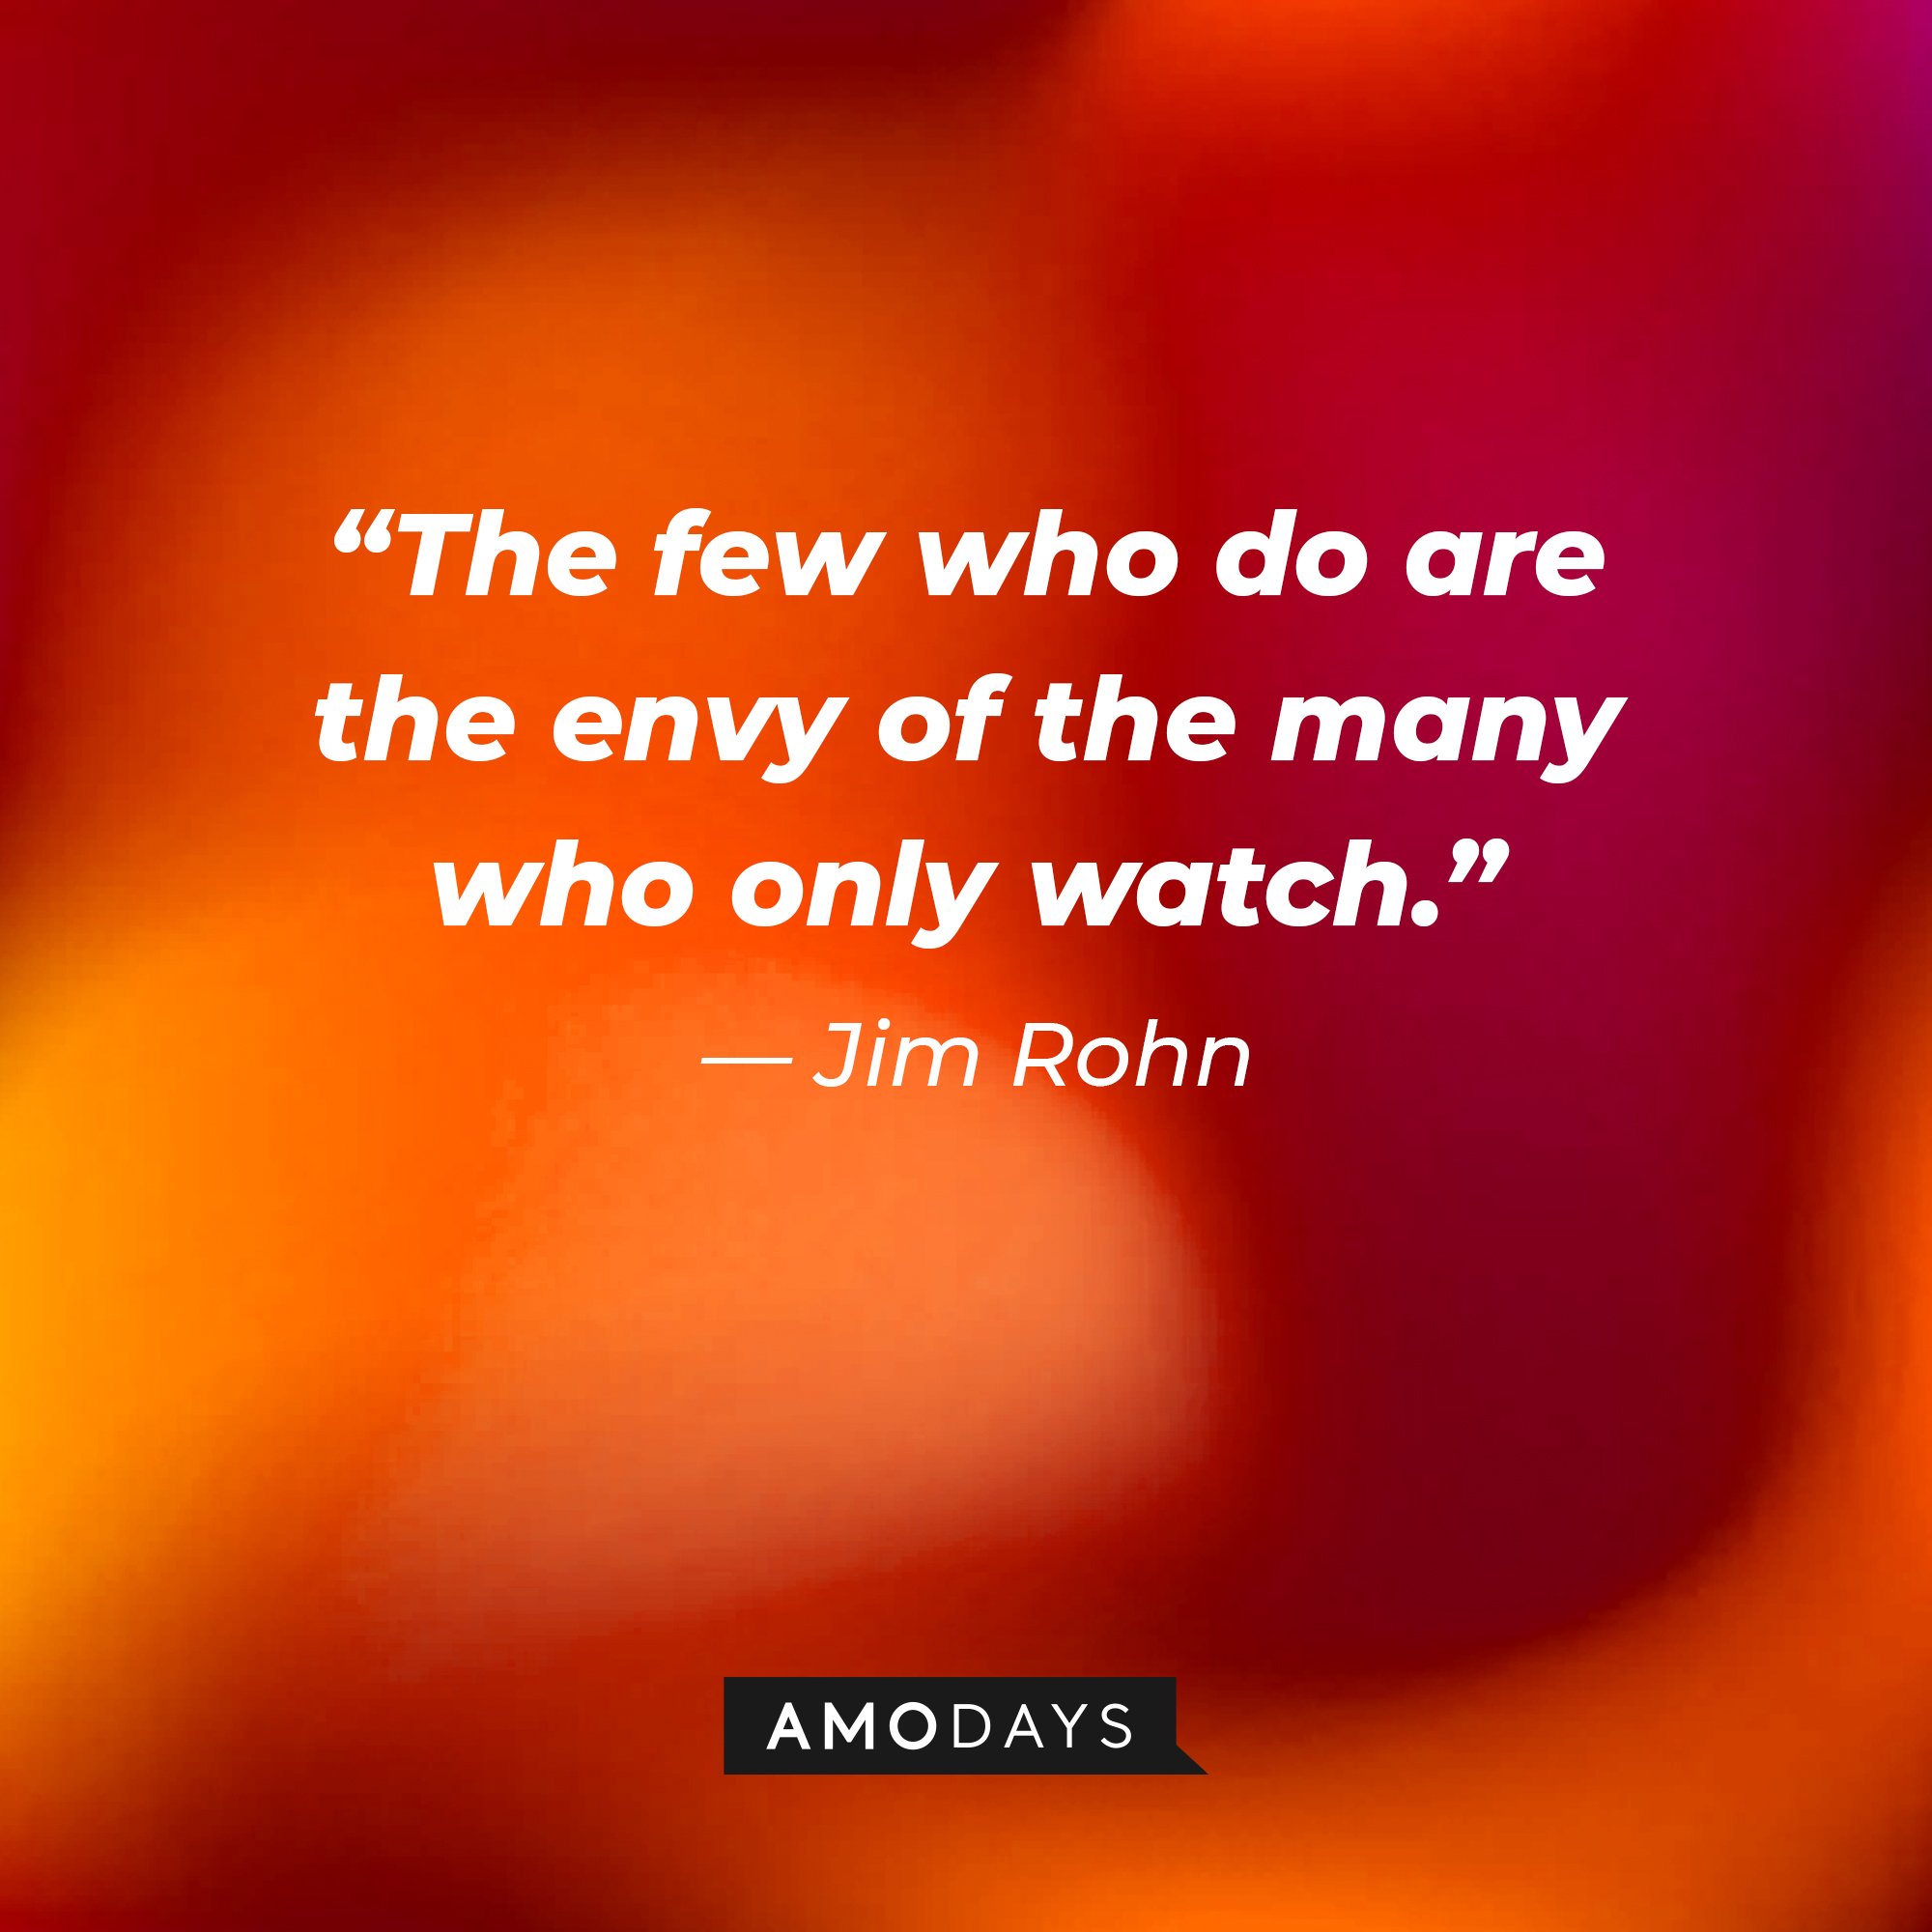  Jim Rohn's quote: “The few who do are the envy of the many who only watch.” | Image: AmoDays